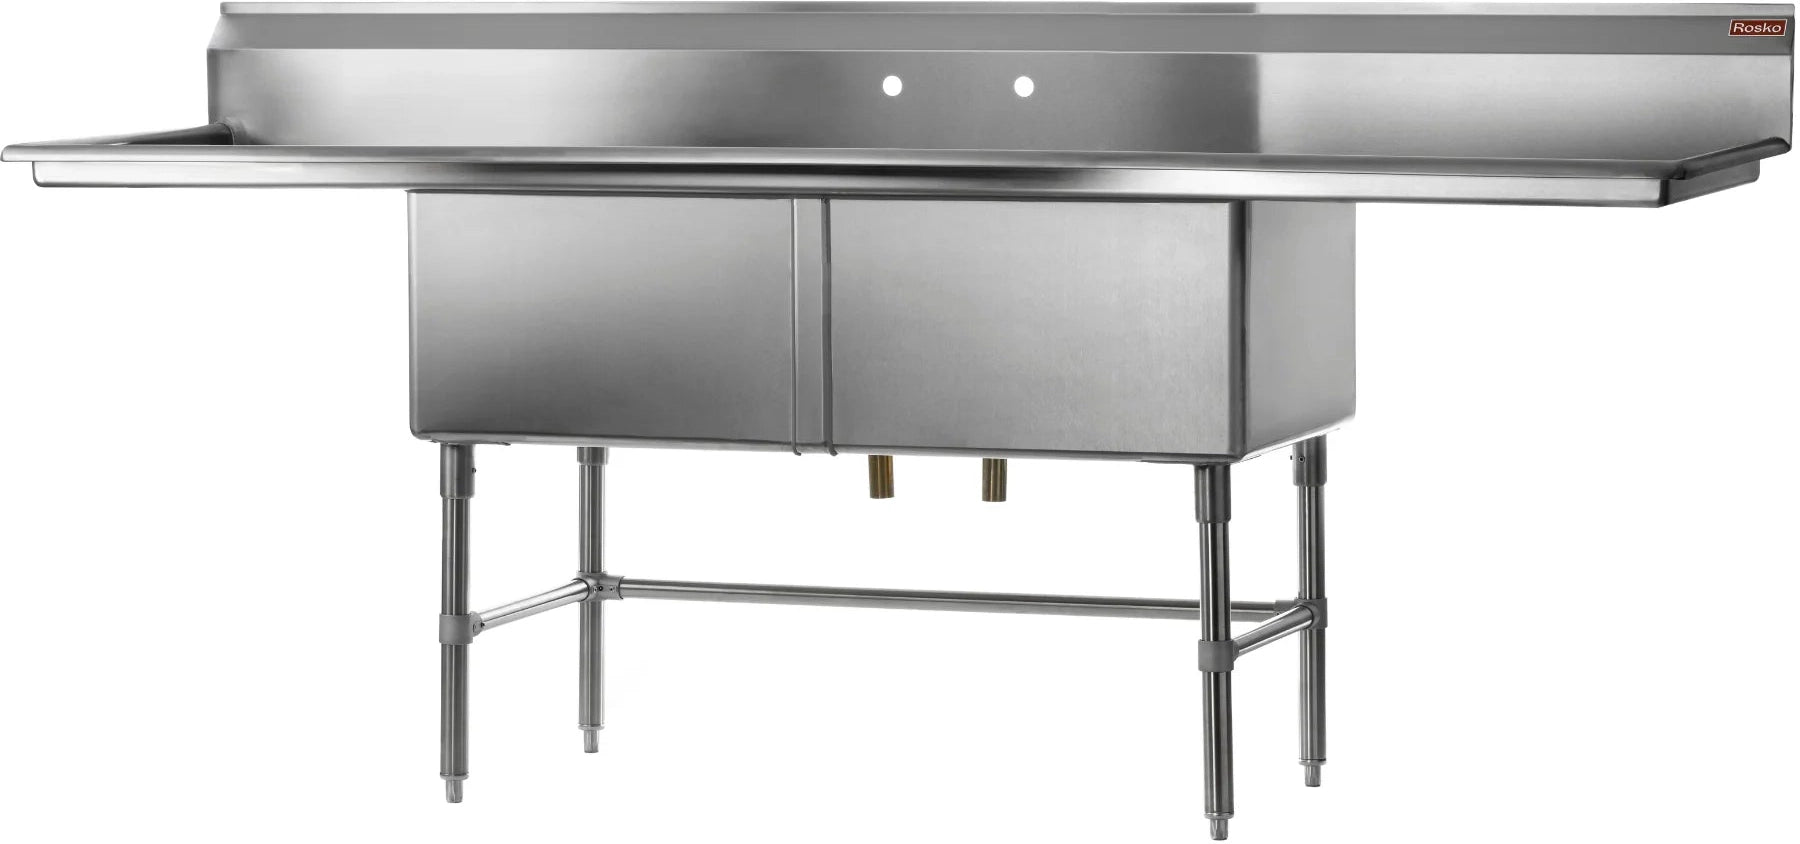 Julien - Rosko 24" x 24" Double-Bowl Sink, Right and Left Drainboards, Stainless Steel - RO-SD-2424-LR24